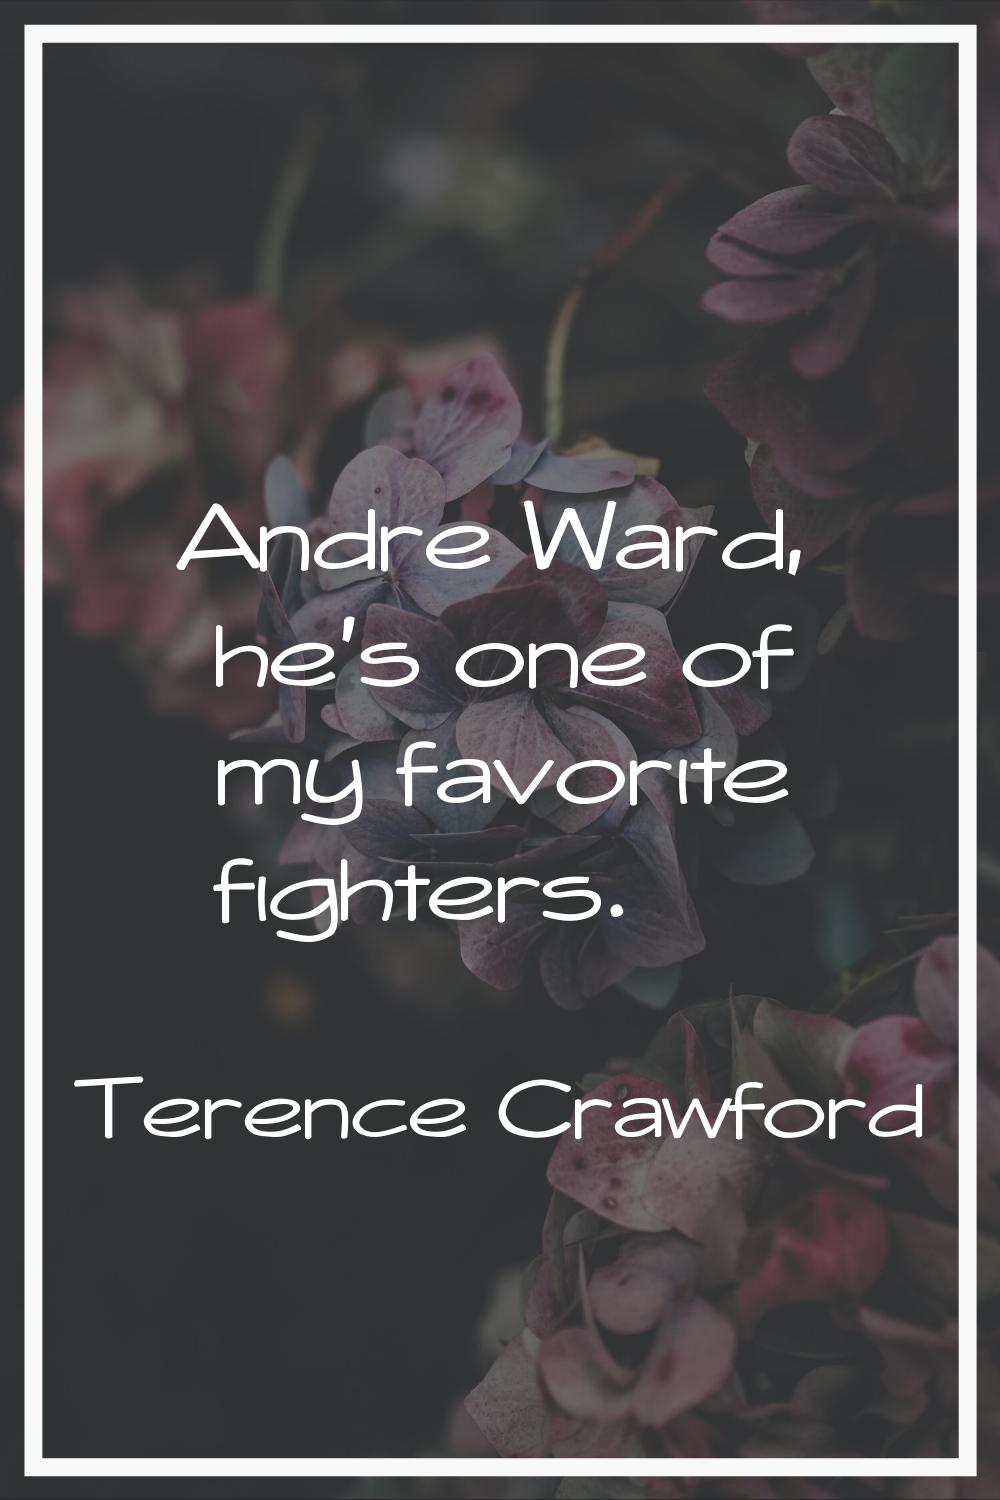 Andre Ward, he's one of my favorite fighters.